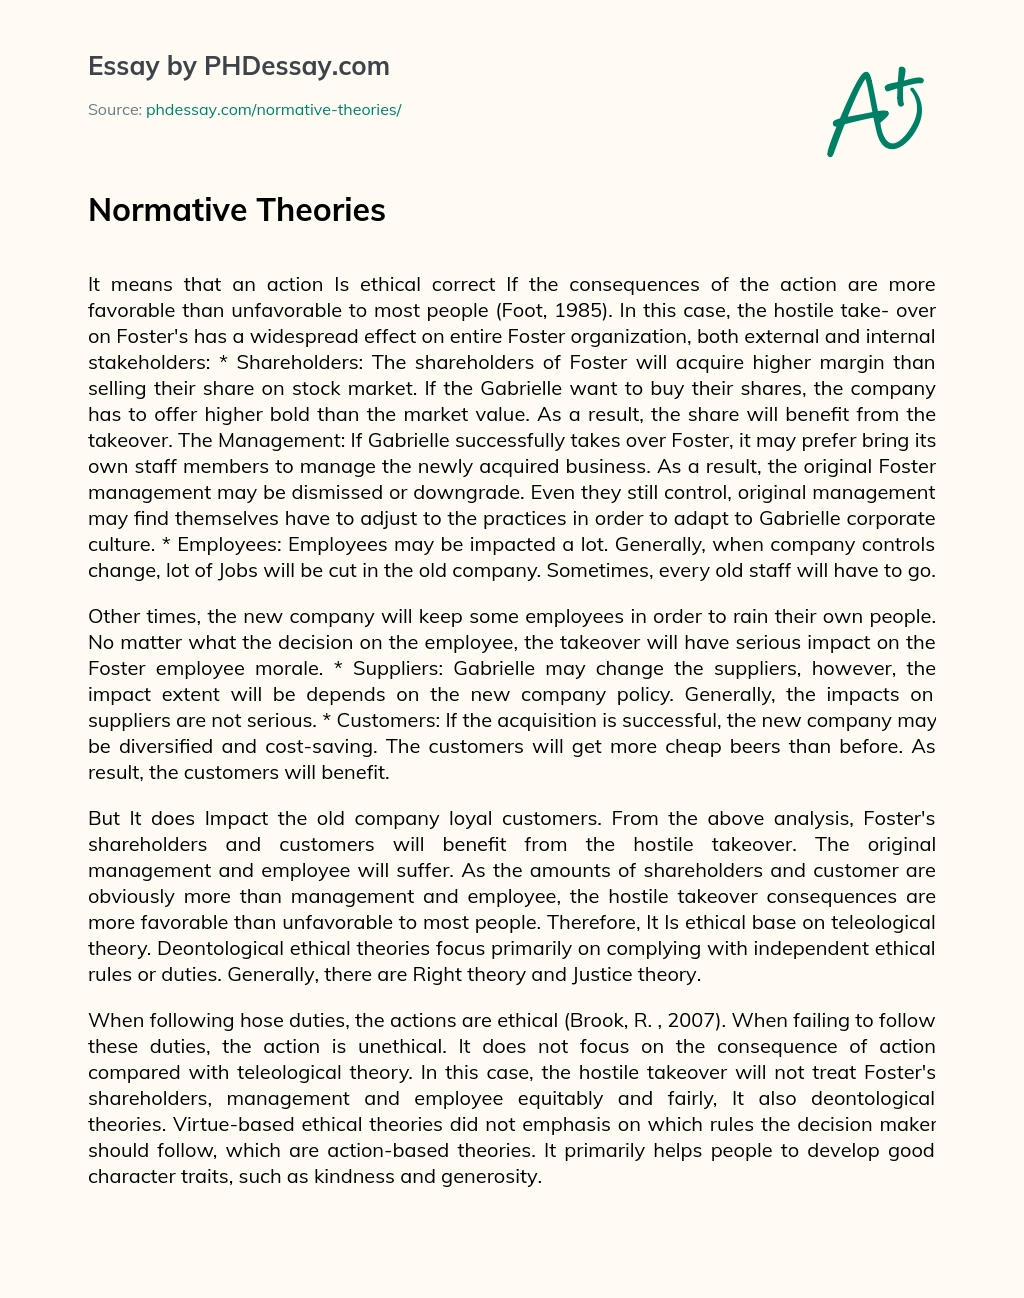 Normative Theories essay